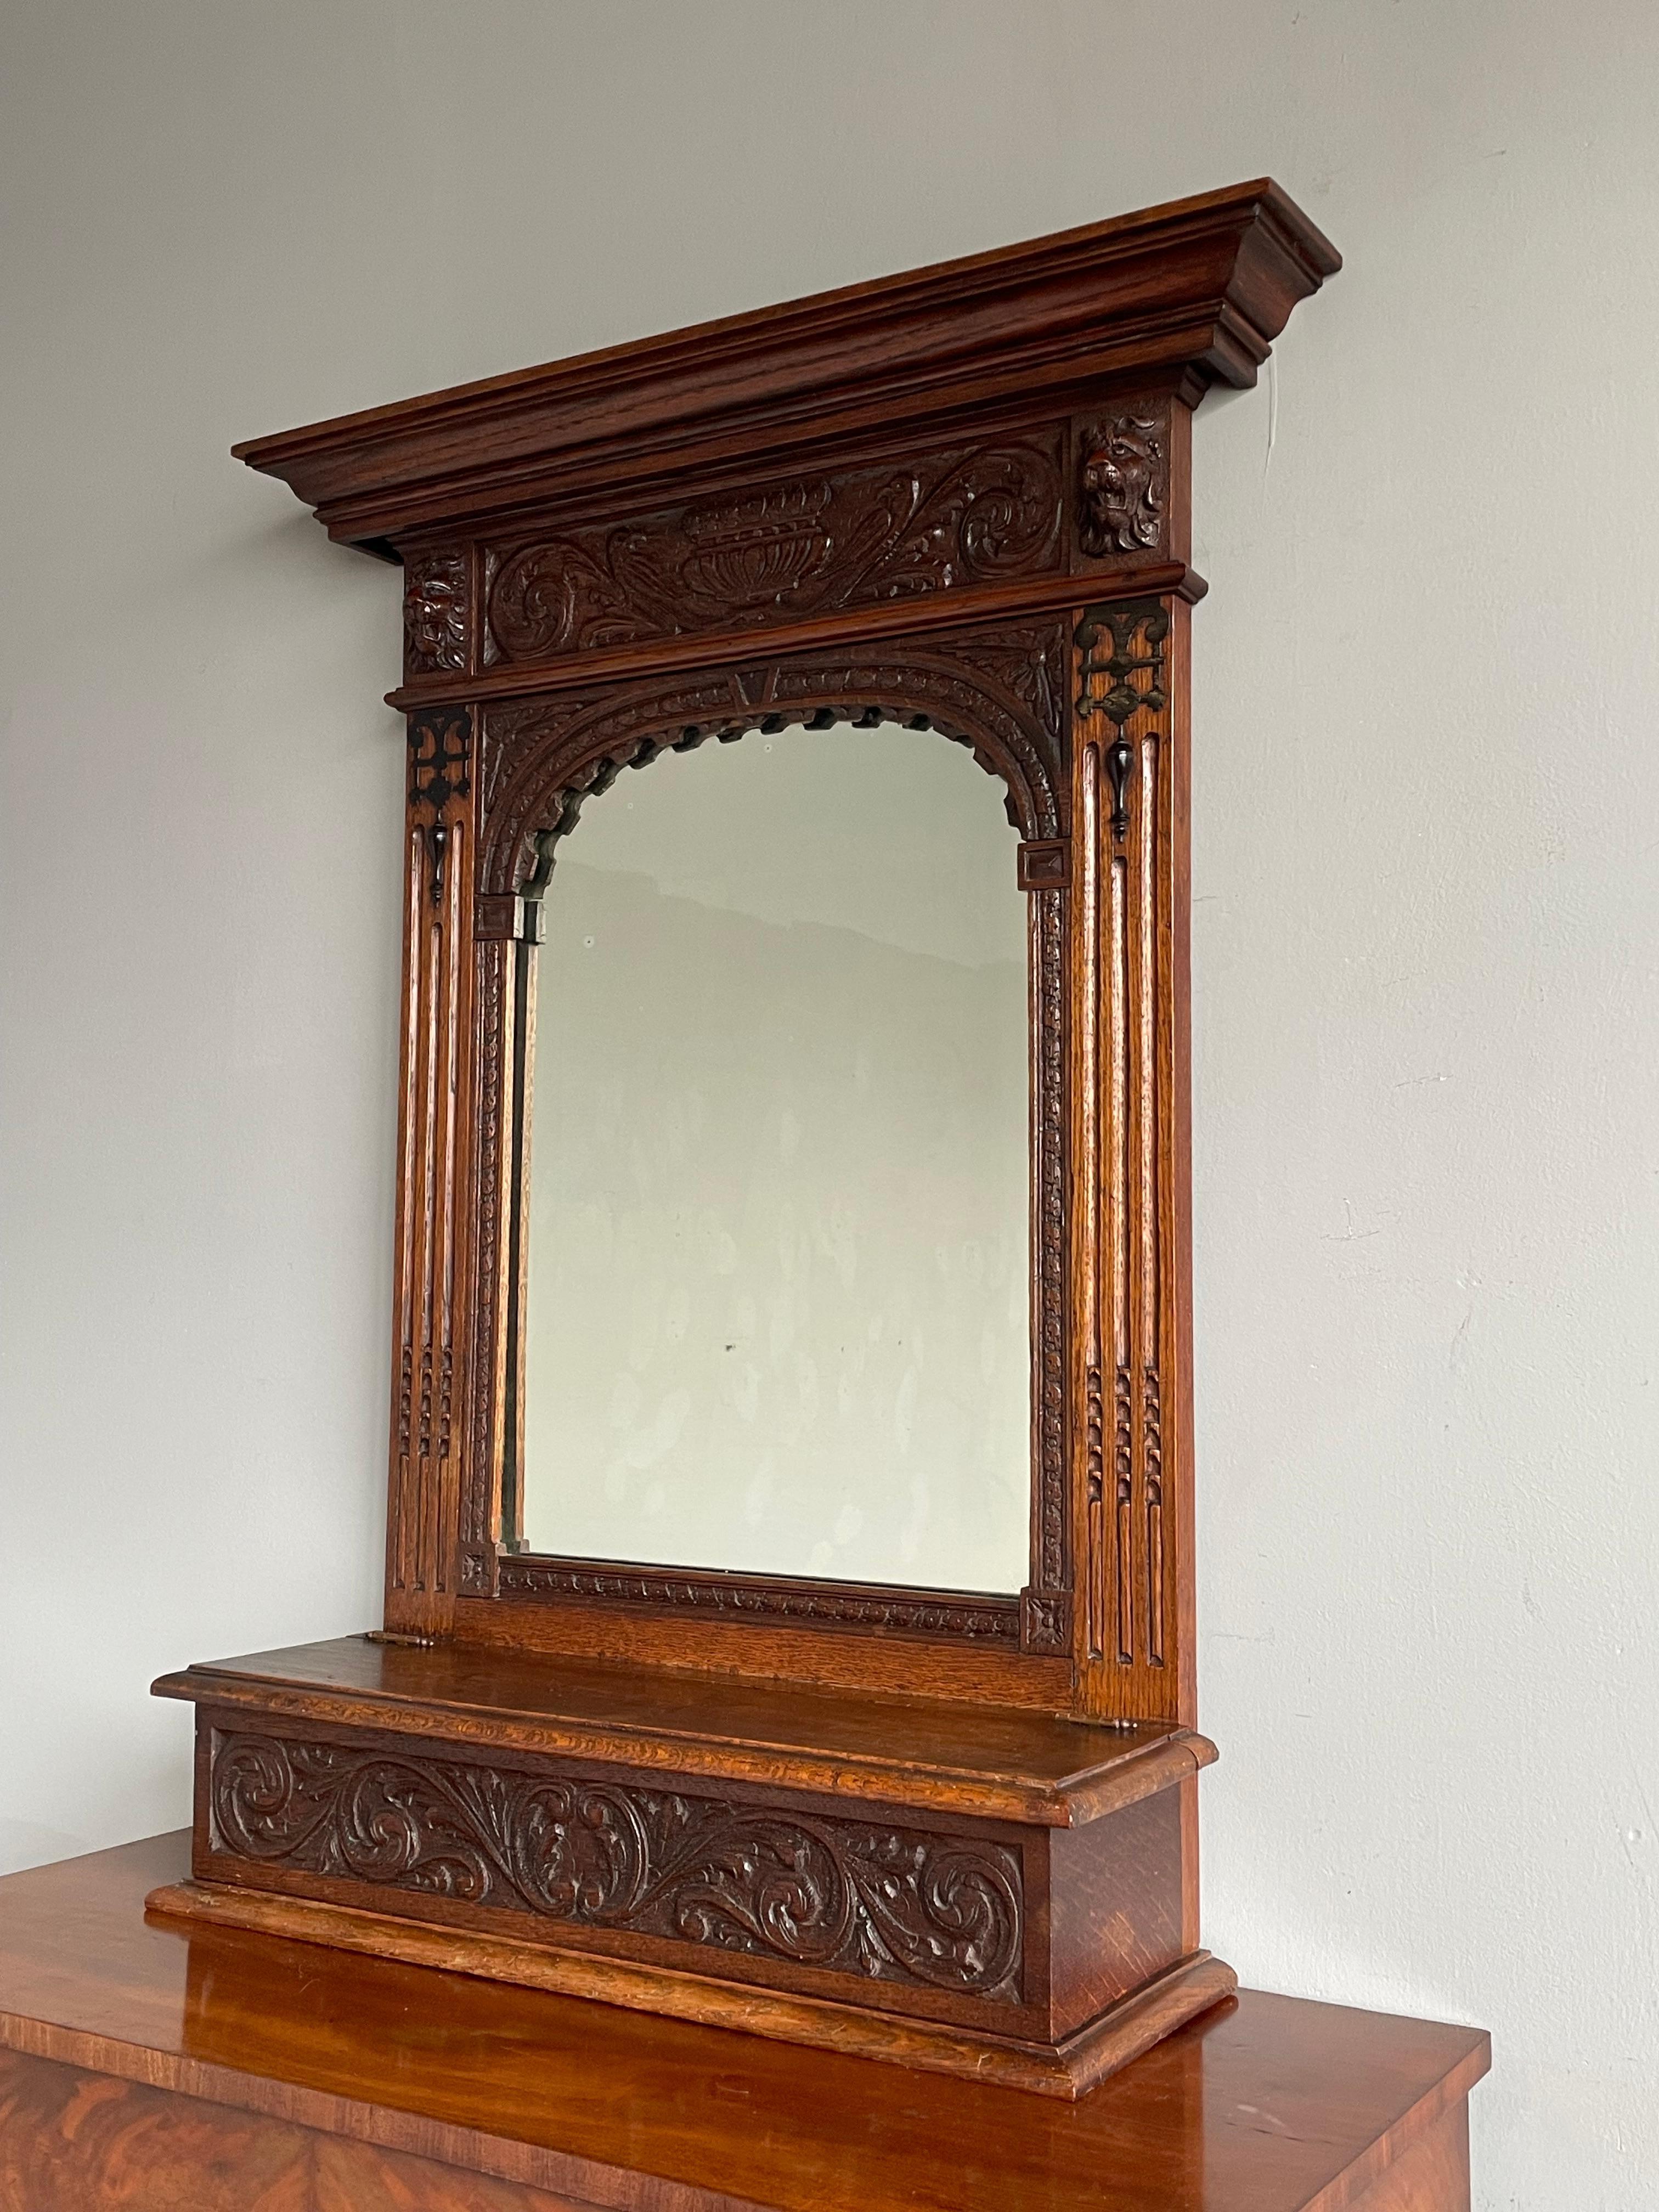 Hand Carved Renaissance Revival Wall Mirror with Lidded Gloves & Scarf Box 1890s For Sale 9